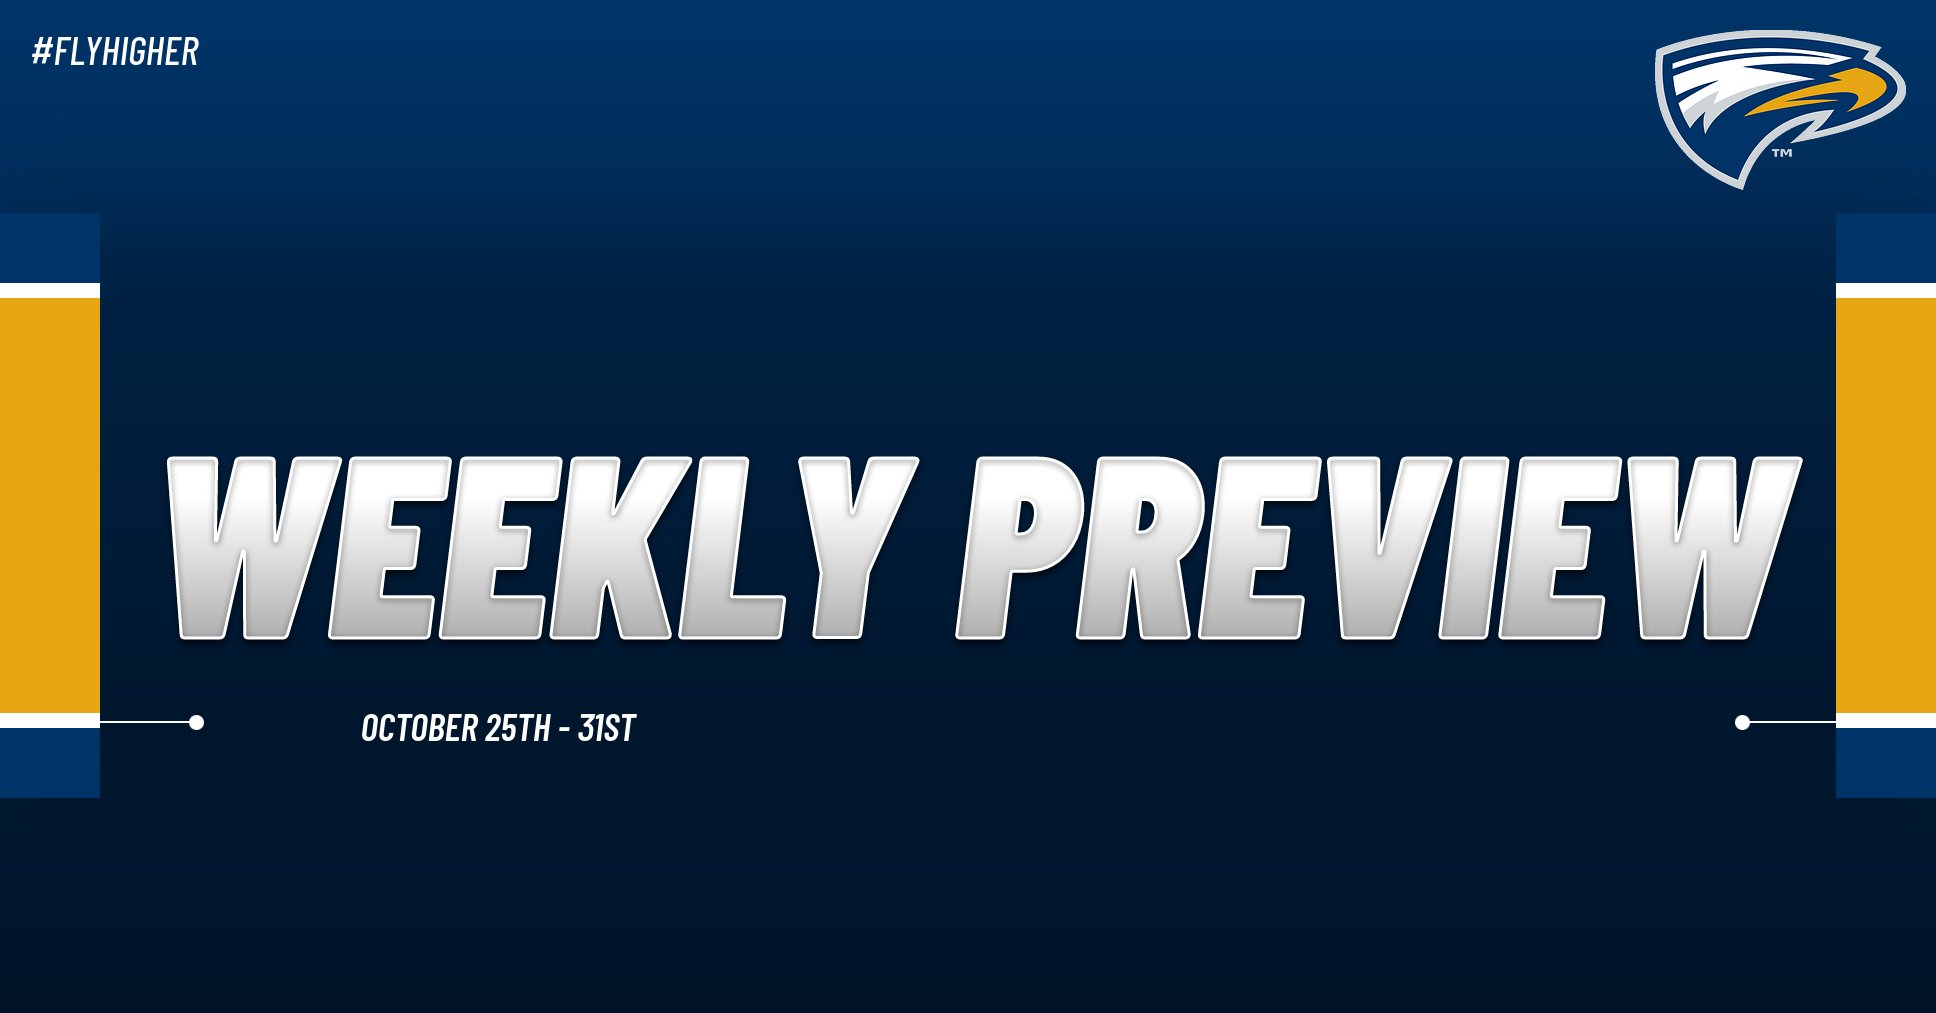 Emory Athletics Weekly Preview - October 25th - 31st